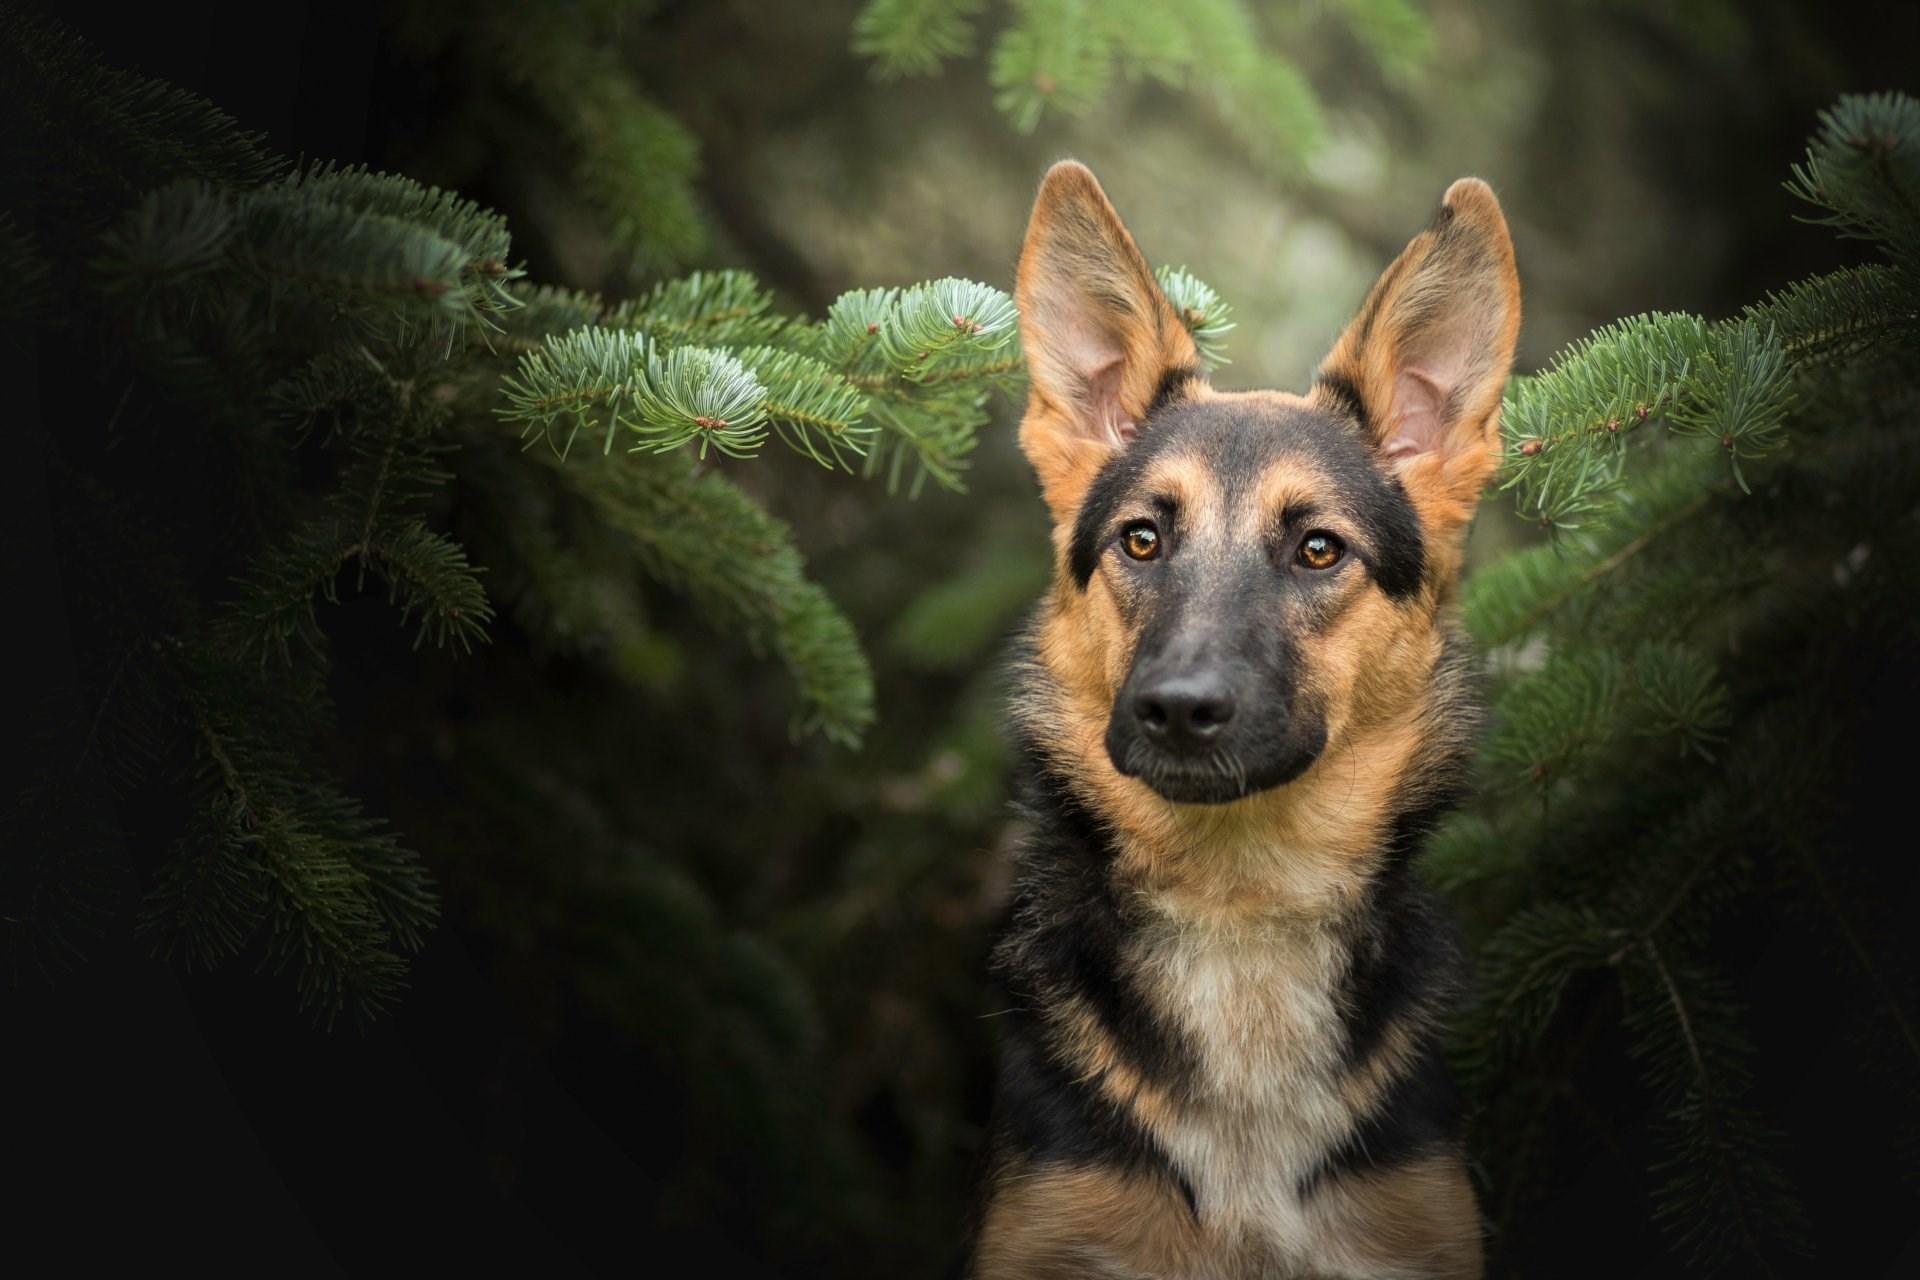 Image: Dog, breed, shepherd, ears, muzzle, tree, fir, branches